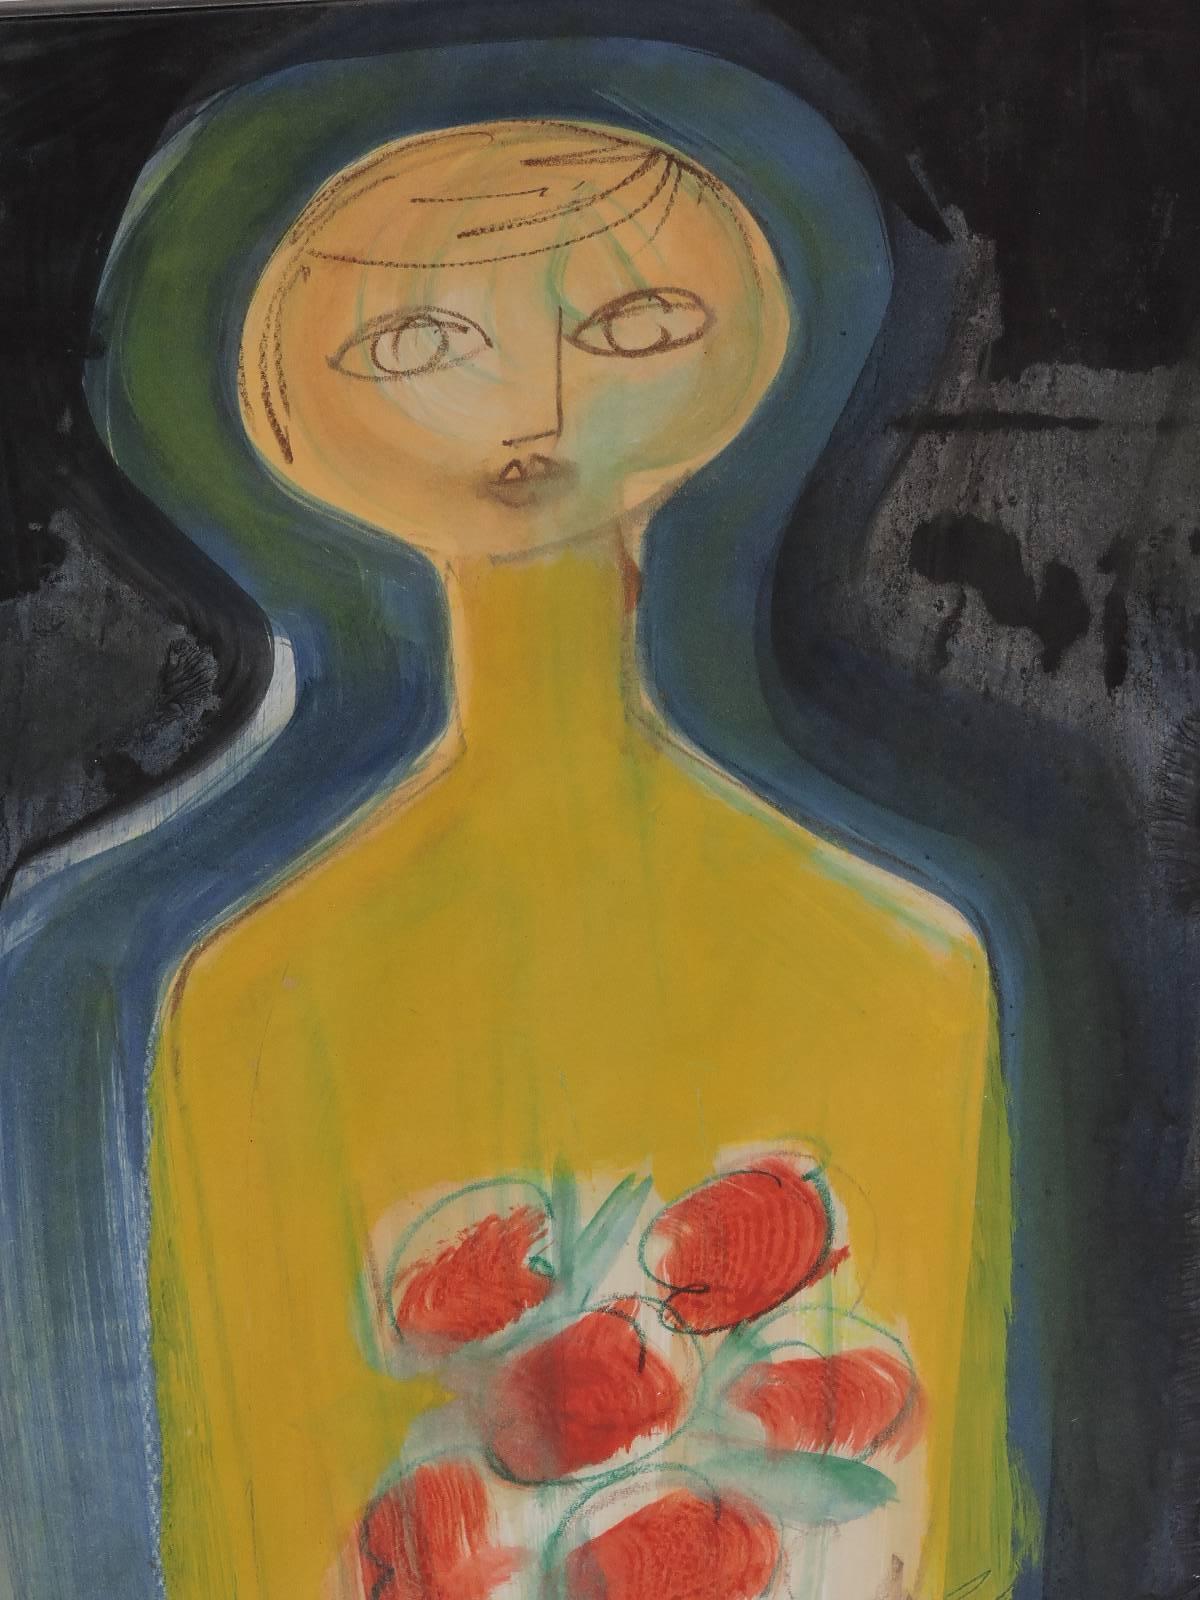 A very appealing large modernist gouache and crayon mixed media painting of woman holding a bouquet of red flowers executed with spontaneous brush strokes and a beautifully layered color field - signed lower right bottom C. Klavsons.